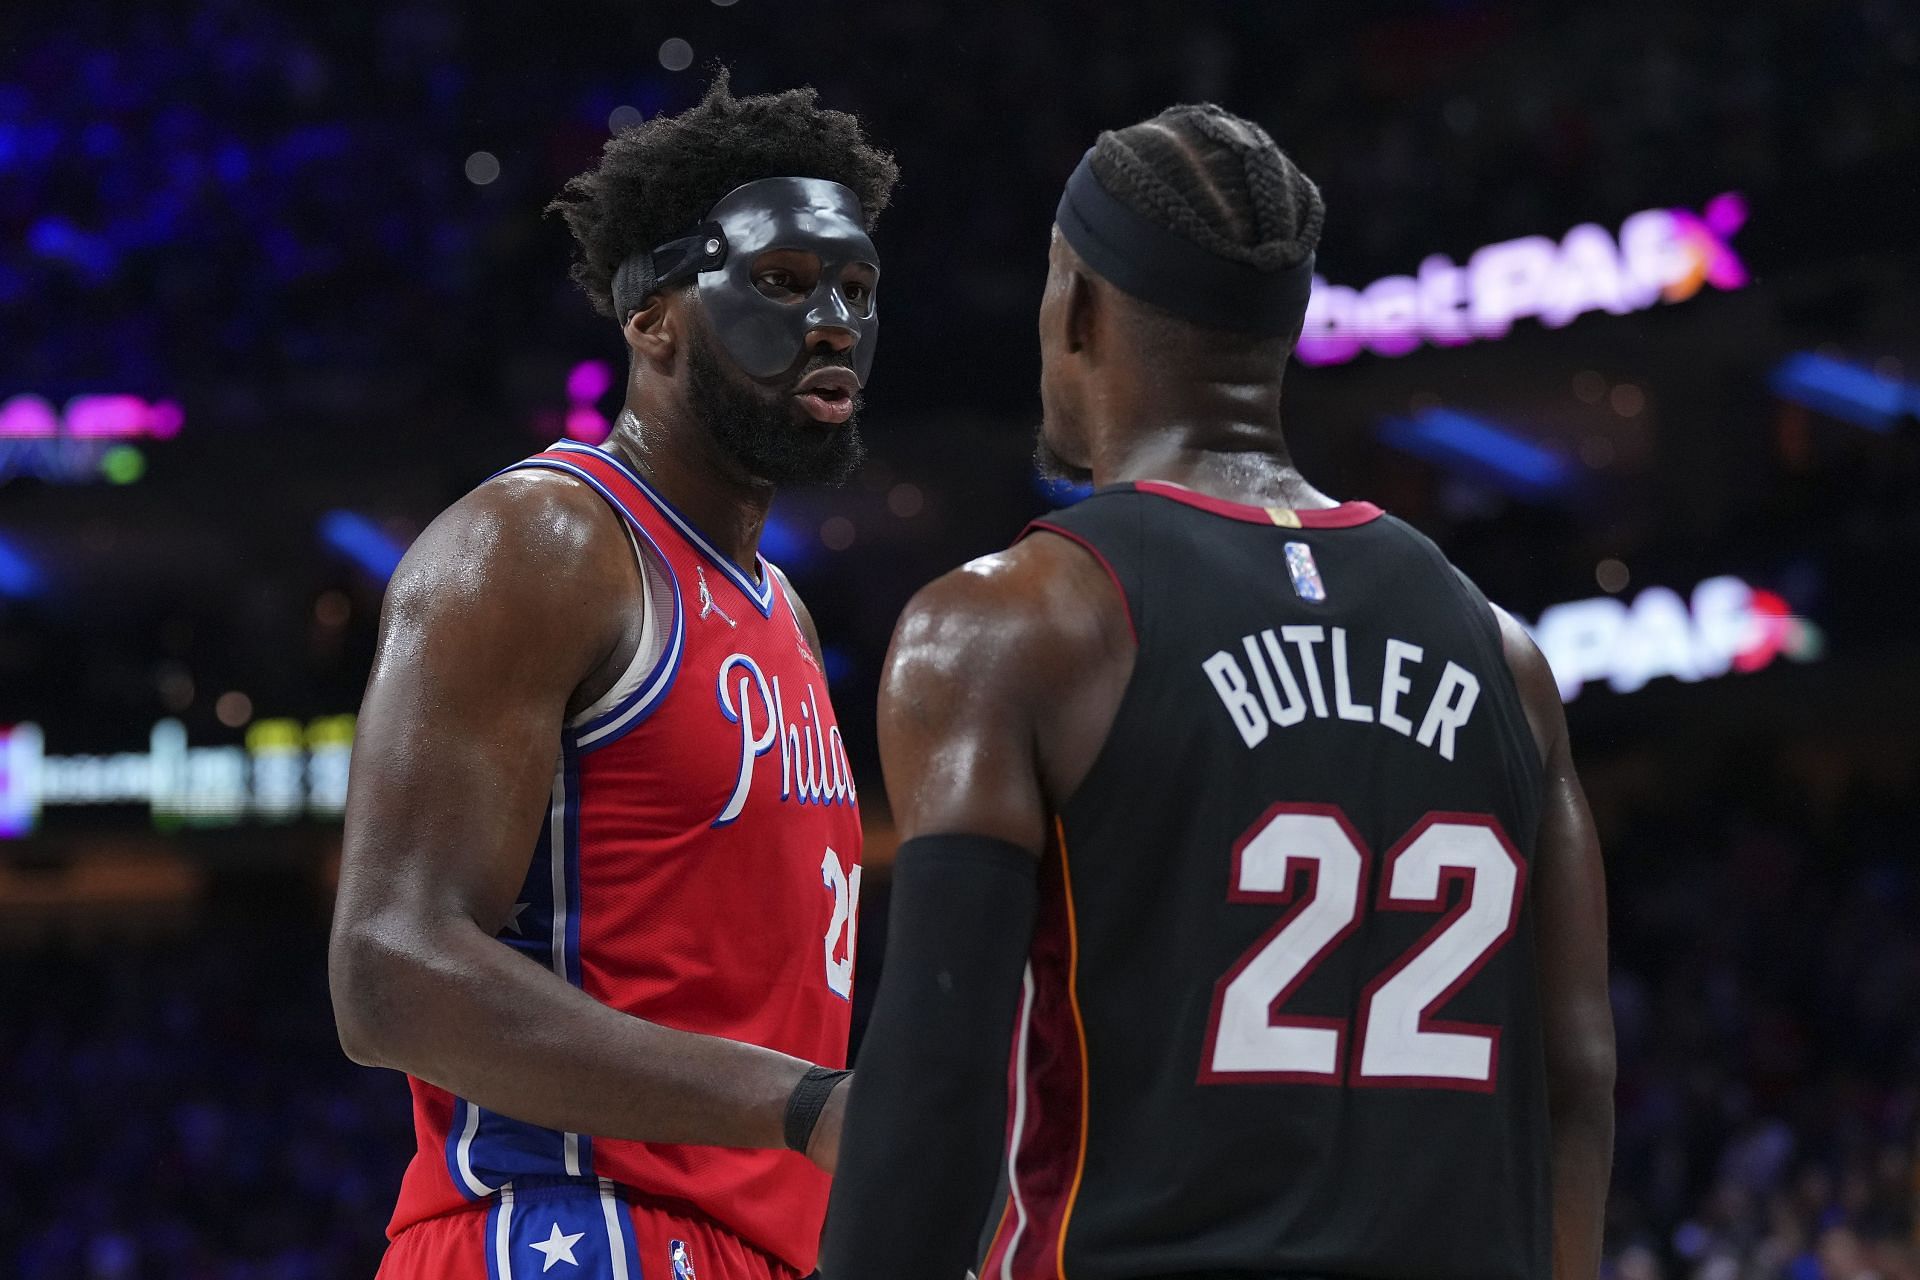 How has Joel Embiid's role changed since 76ers trade for Jimmy Butler?